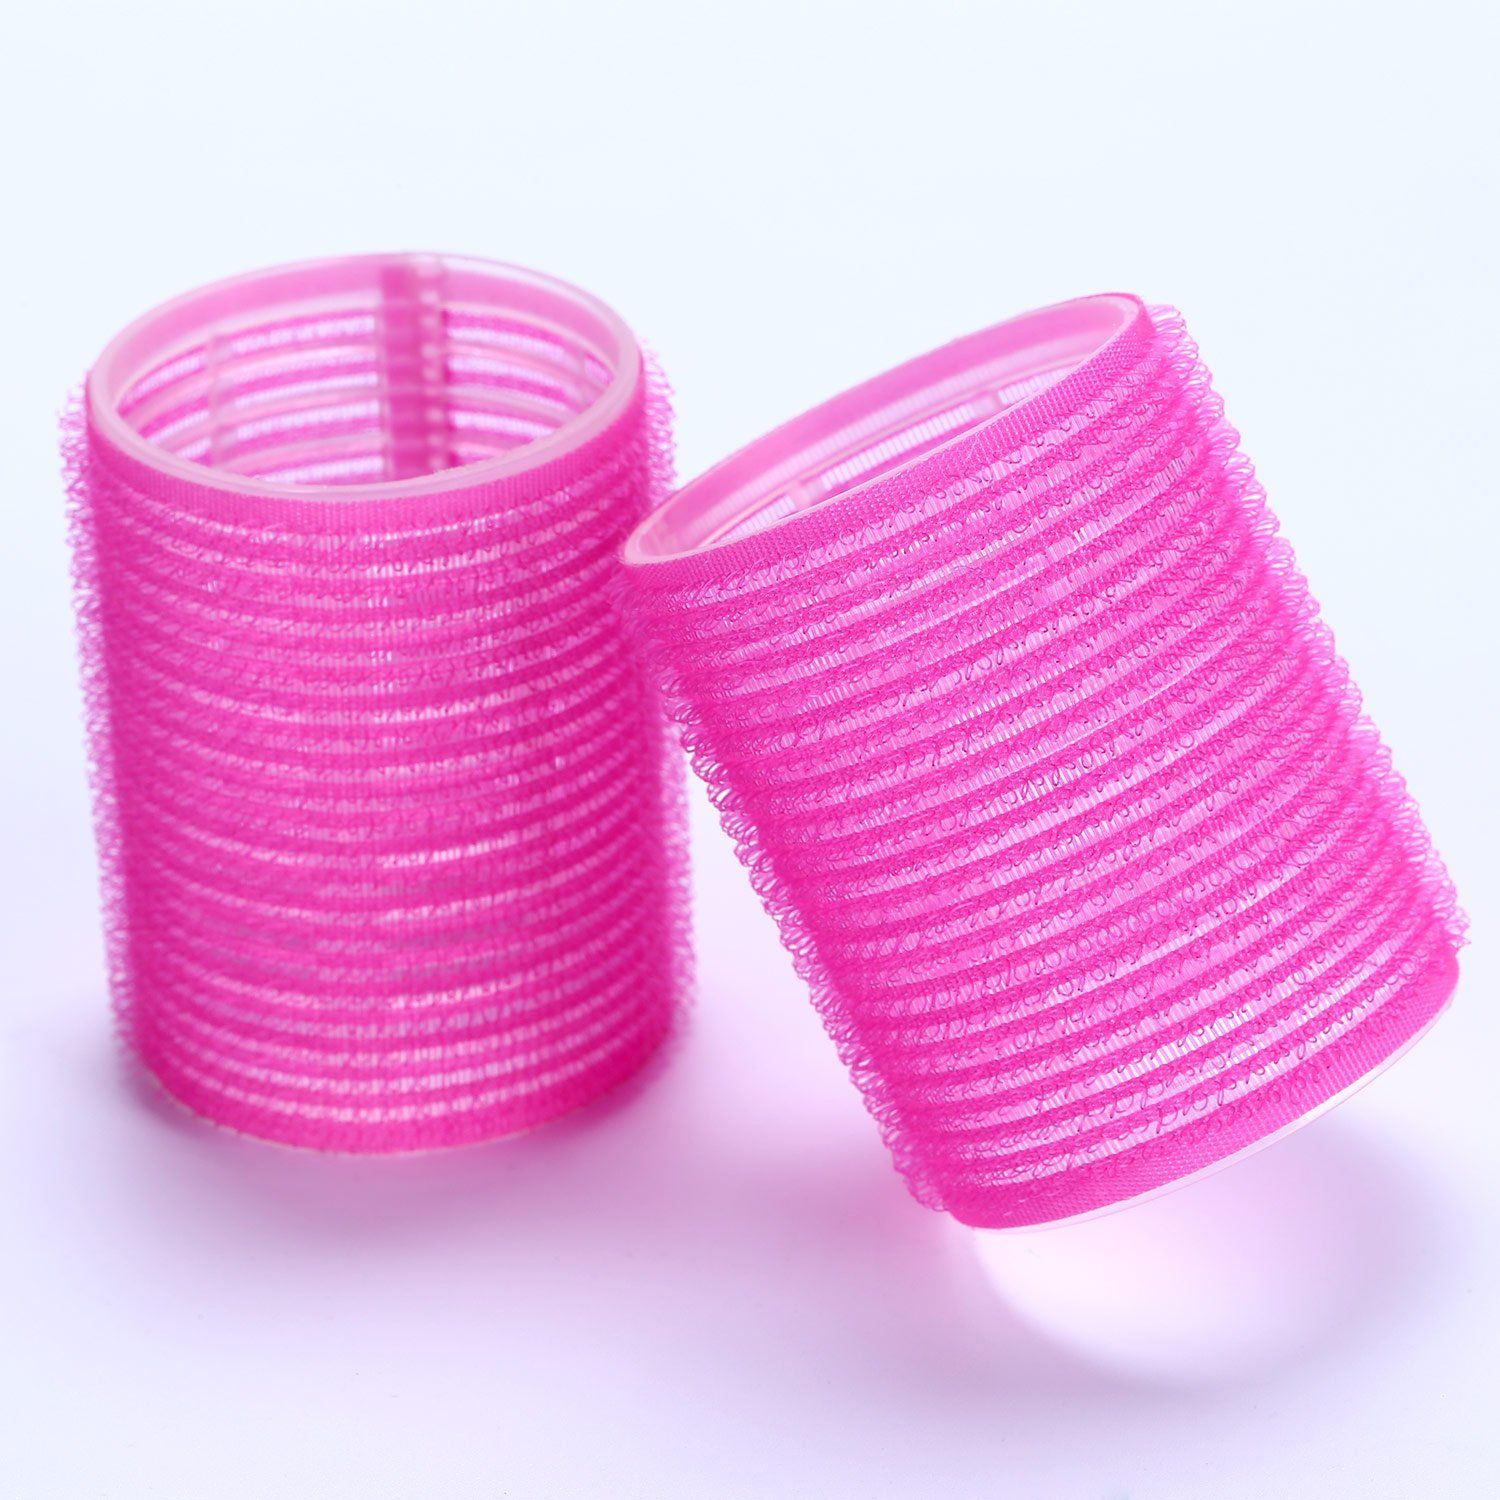 MP Craft Hair Rollers (Pink) - Smart Valuez - Plastic Hair curlers